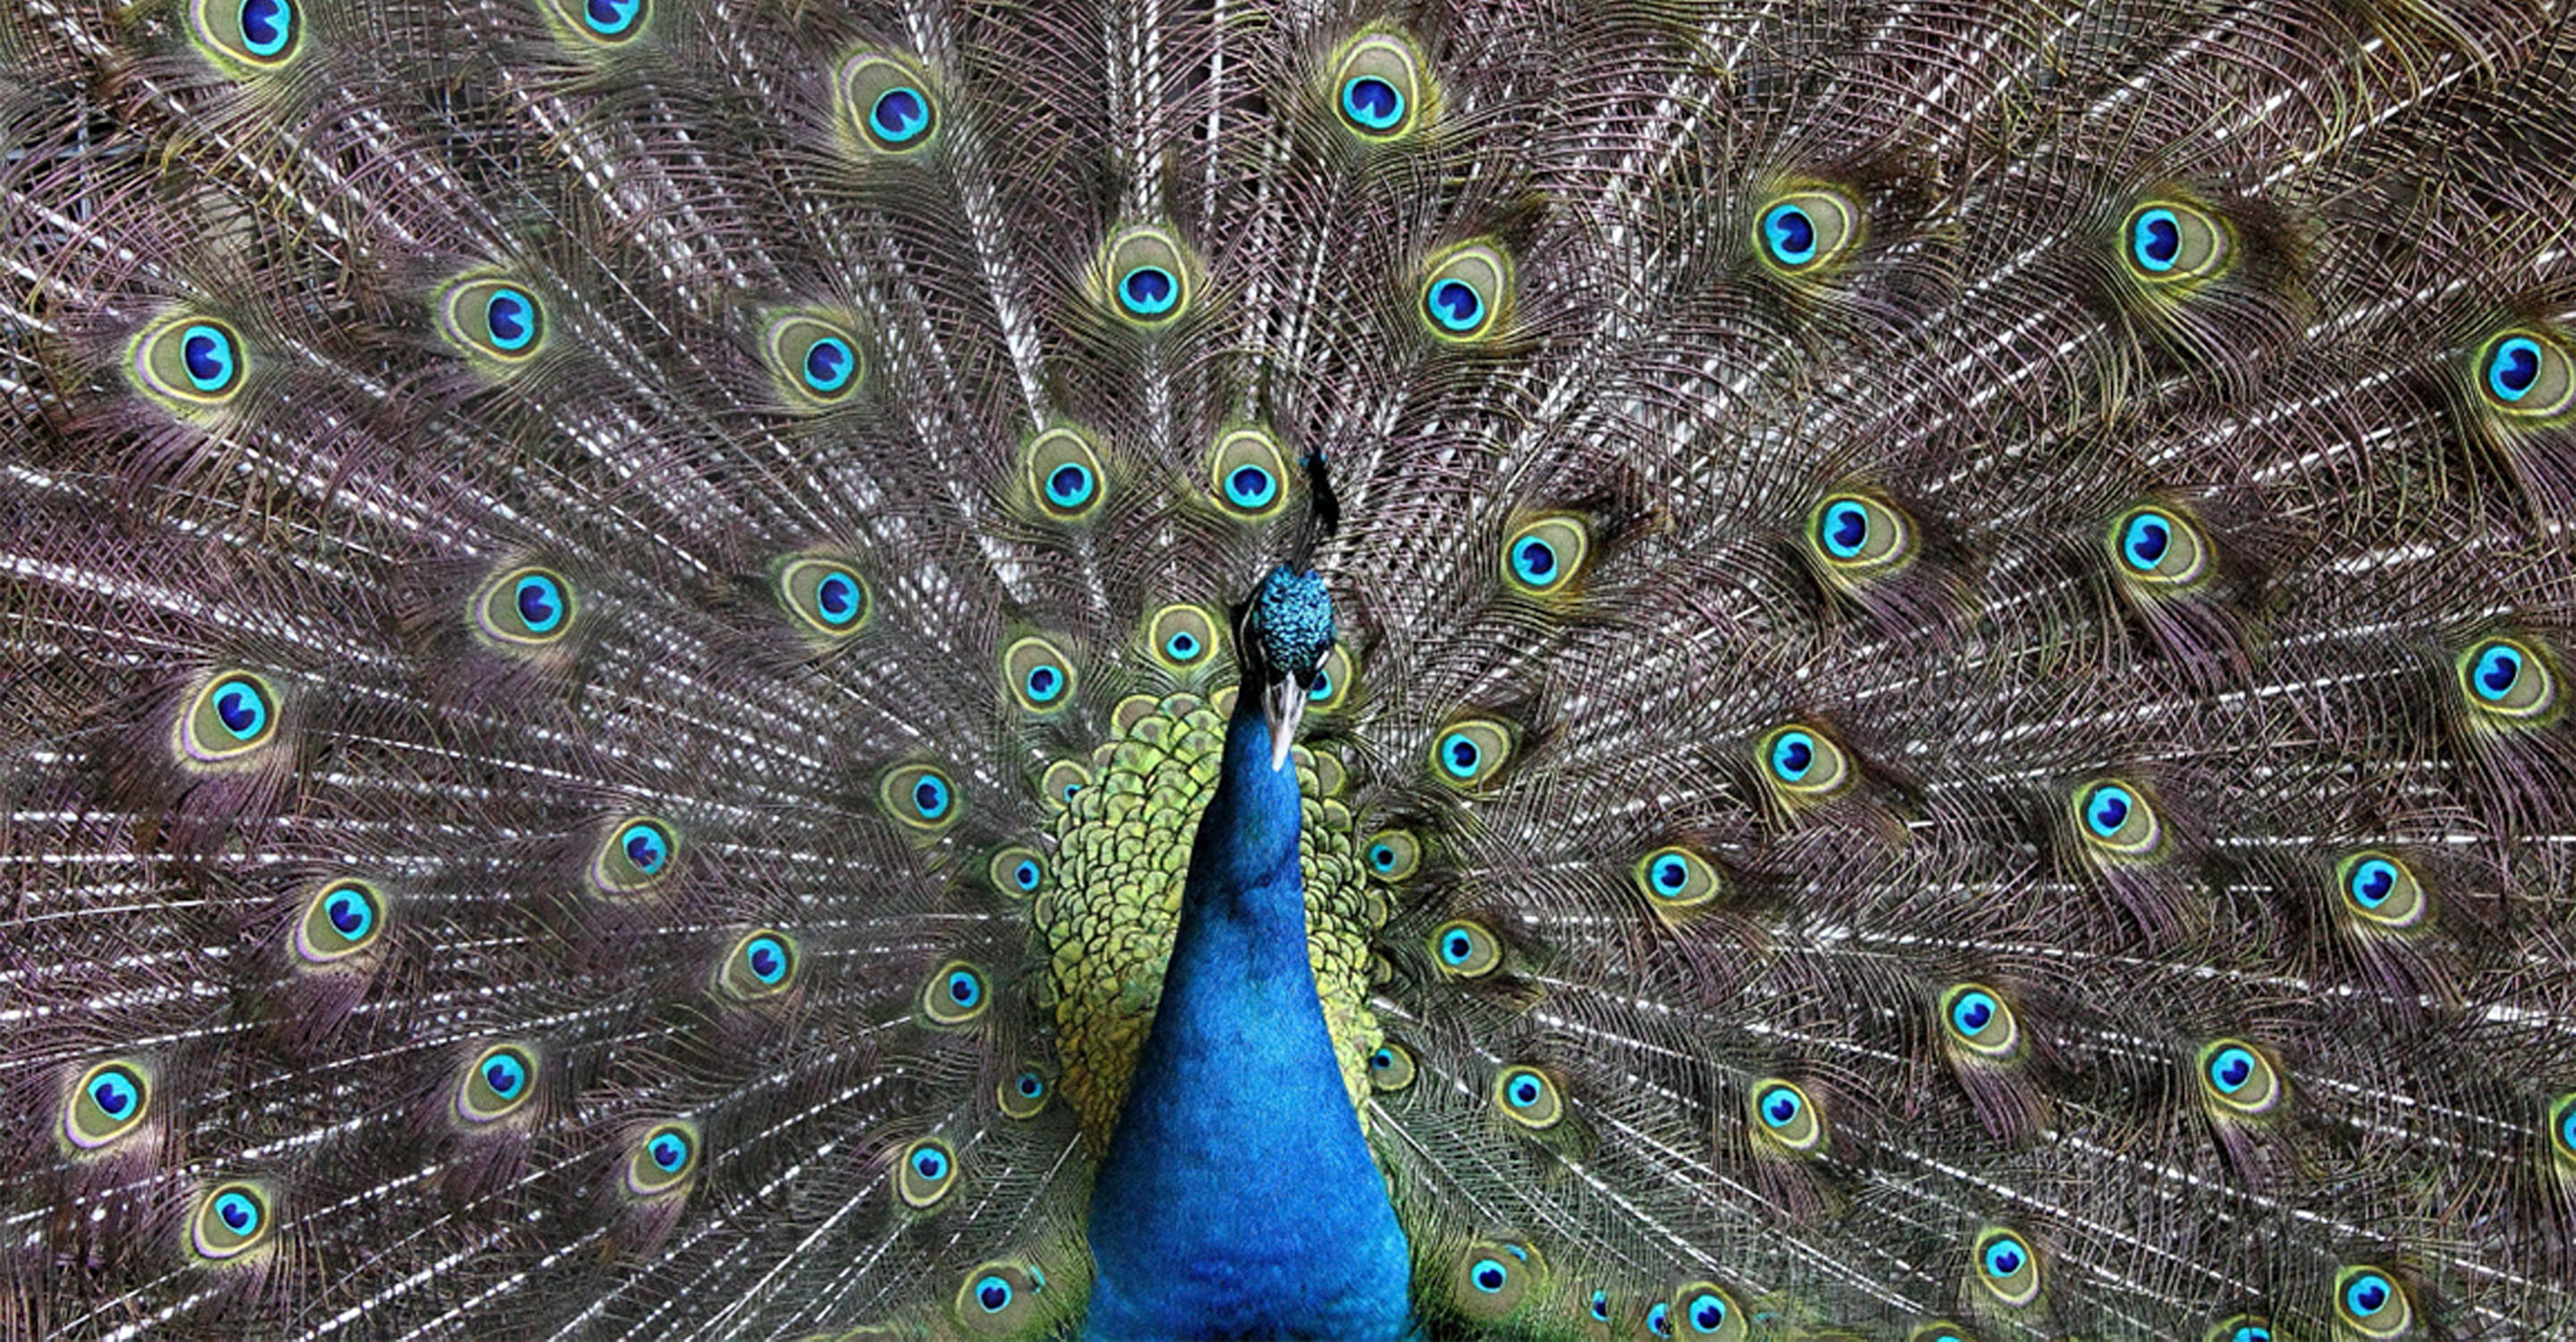 A male peacock displays his large tail feathers during mating season in Ranthambore National Park, India 